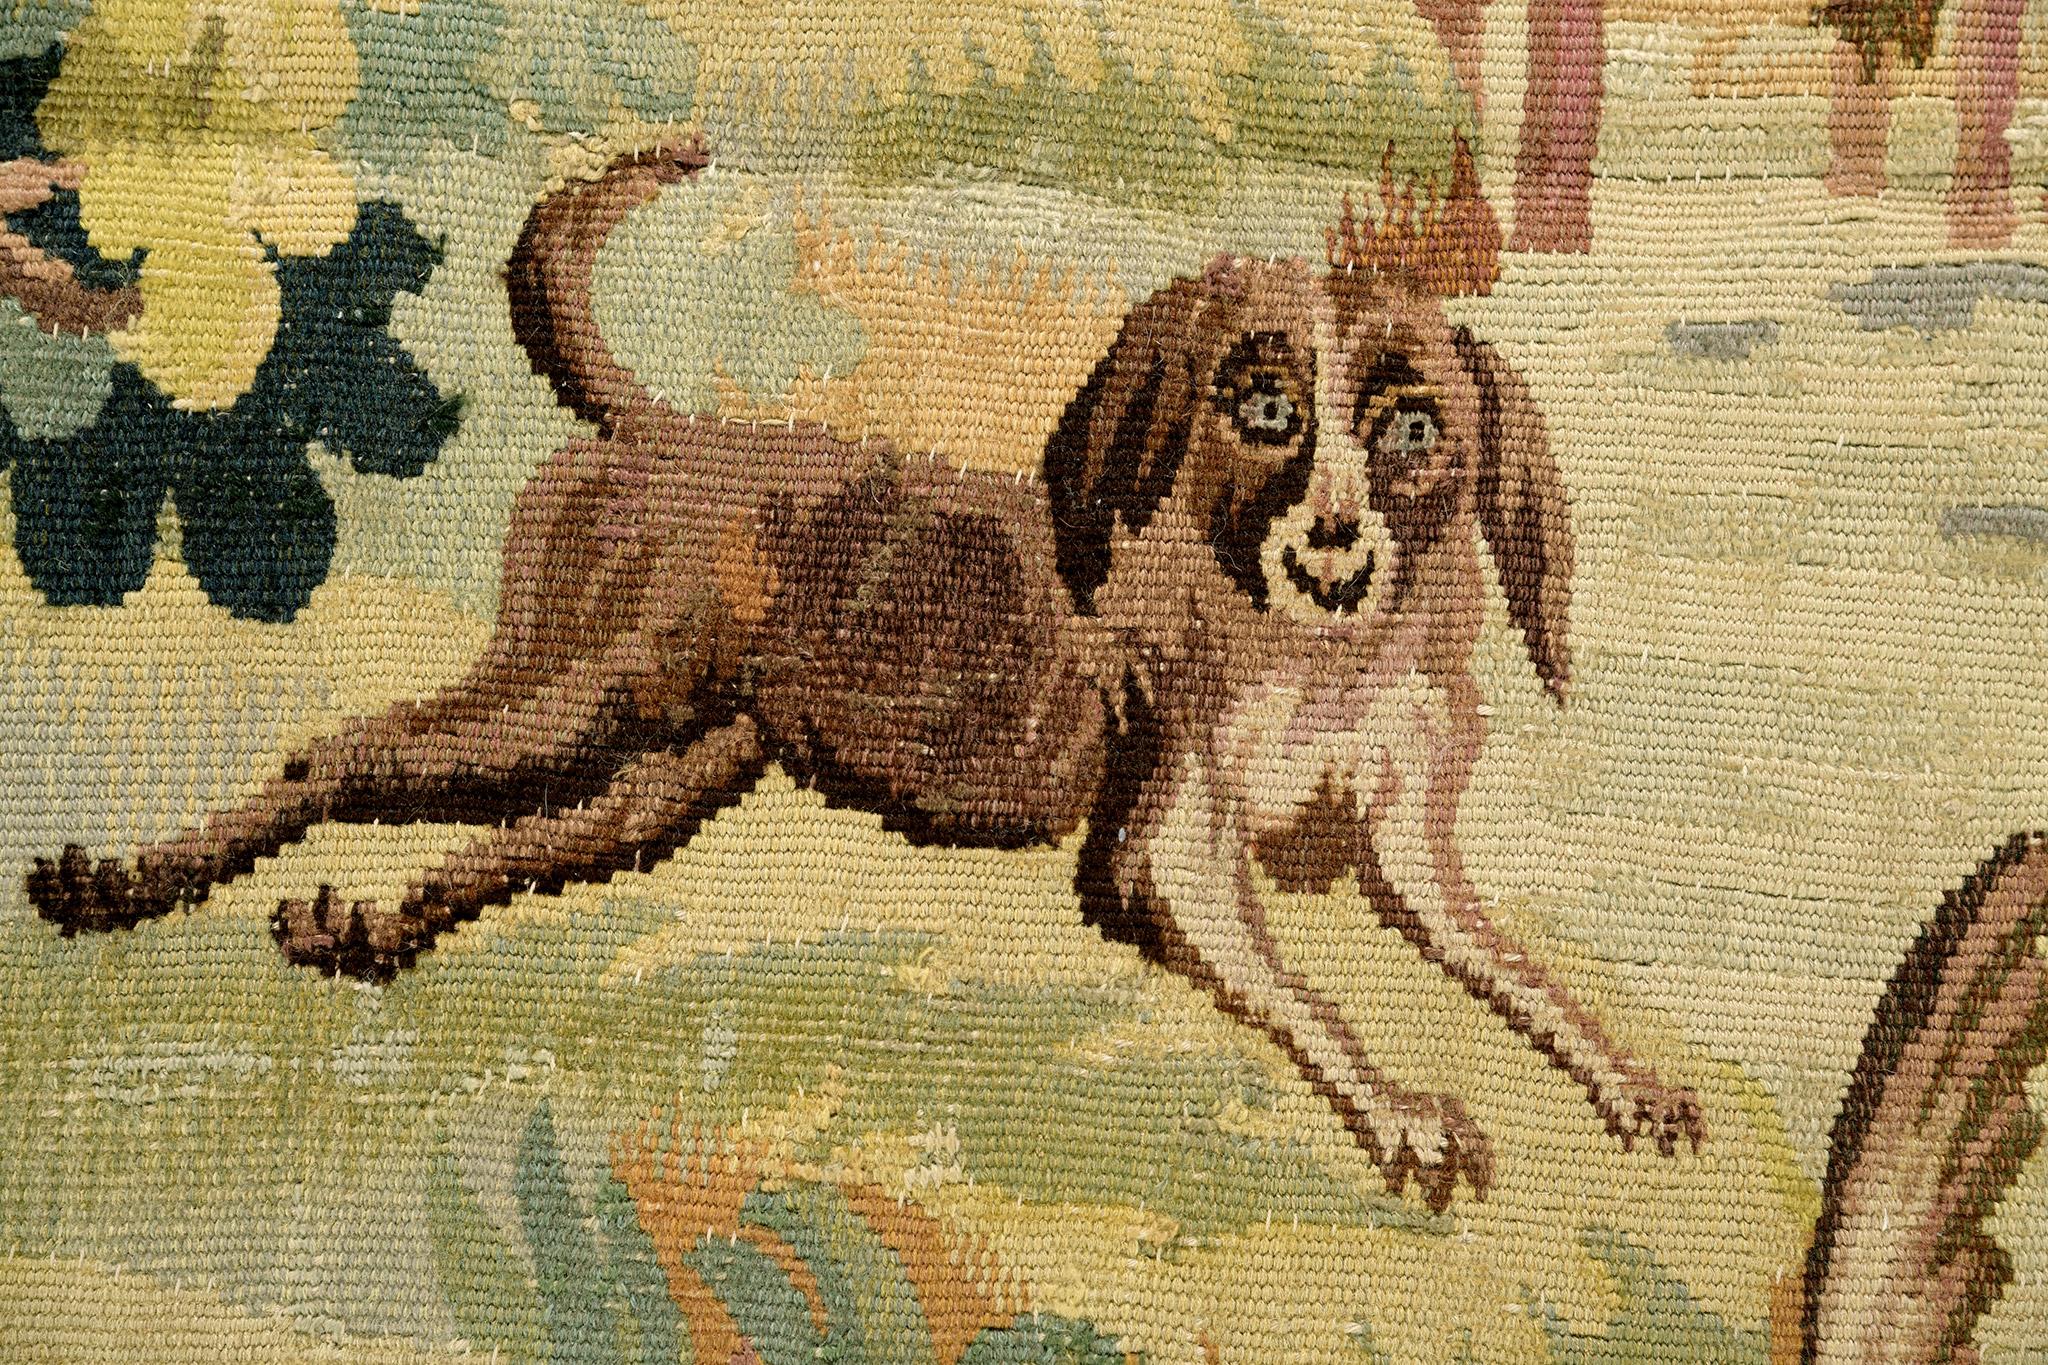 A masterpiece from France in the 1800s represents a traditional forested scene with ducks and a dog. With its intricate details, this handmade tapestry illustrates artistry and sophistication. You are in the right choice in adding this centerpiece